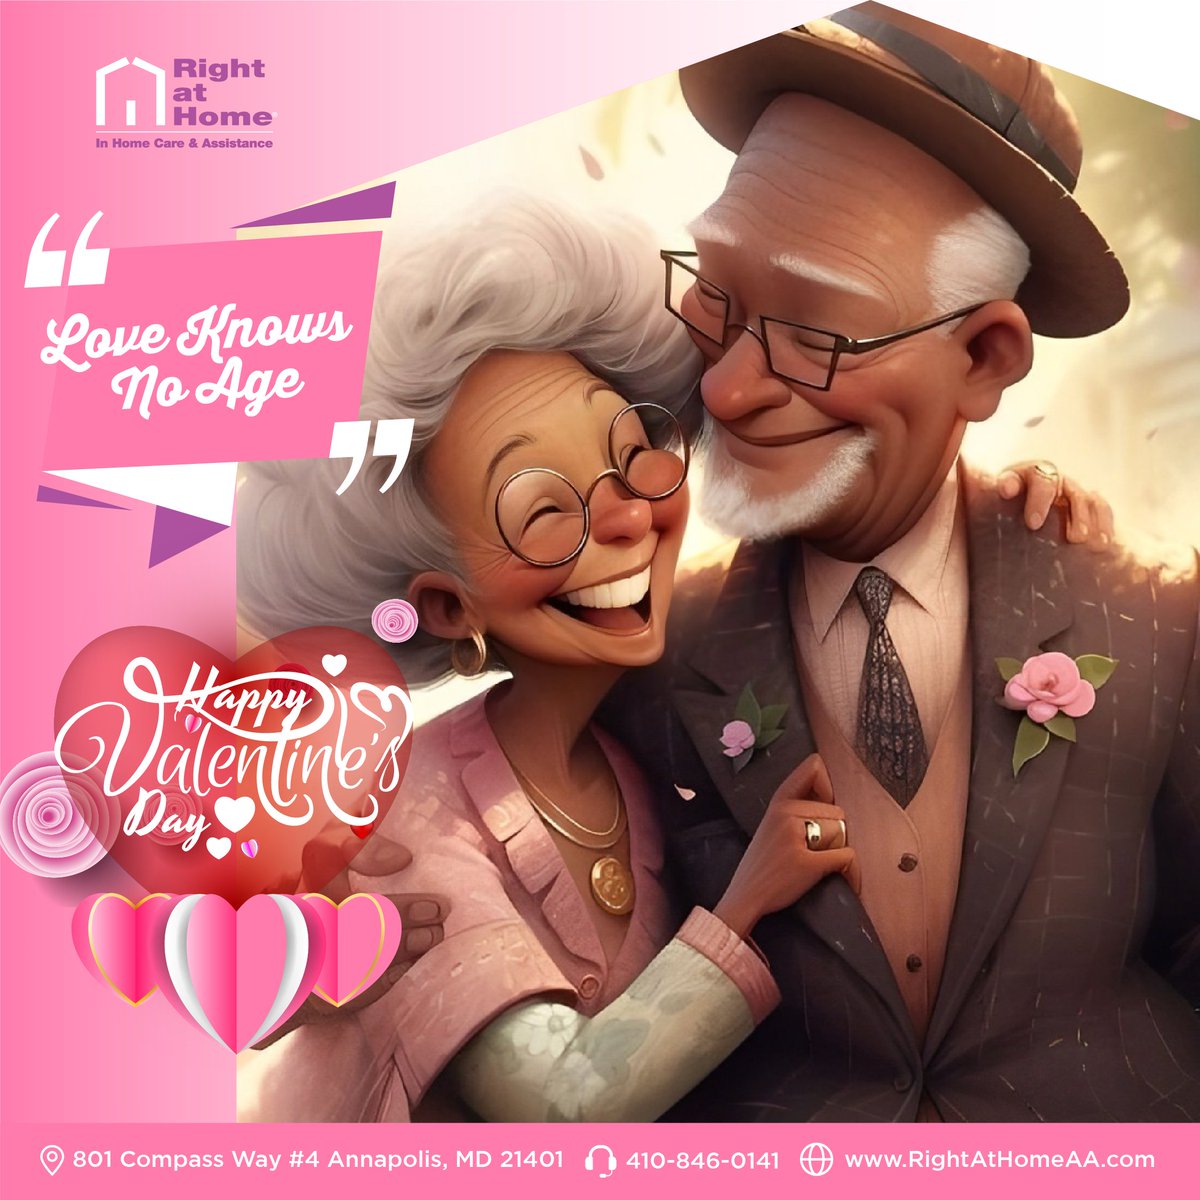 Happy Valentine's from Right At Home Anne Arundel County! 💖 Celebrating love that knows no age. Here's to warmth, memories, and joy in senior lives today. Let's share the love! 💞 #ValentinesDay #SeniorCare #LoveKnowsNoAge #SpreadLove #AnneArundelCounty